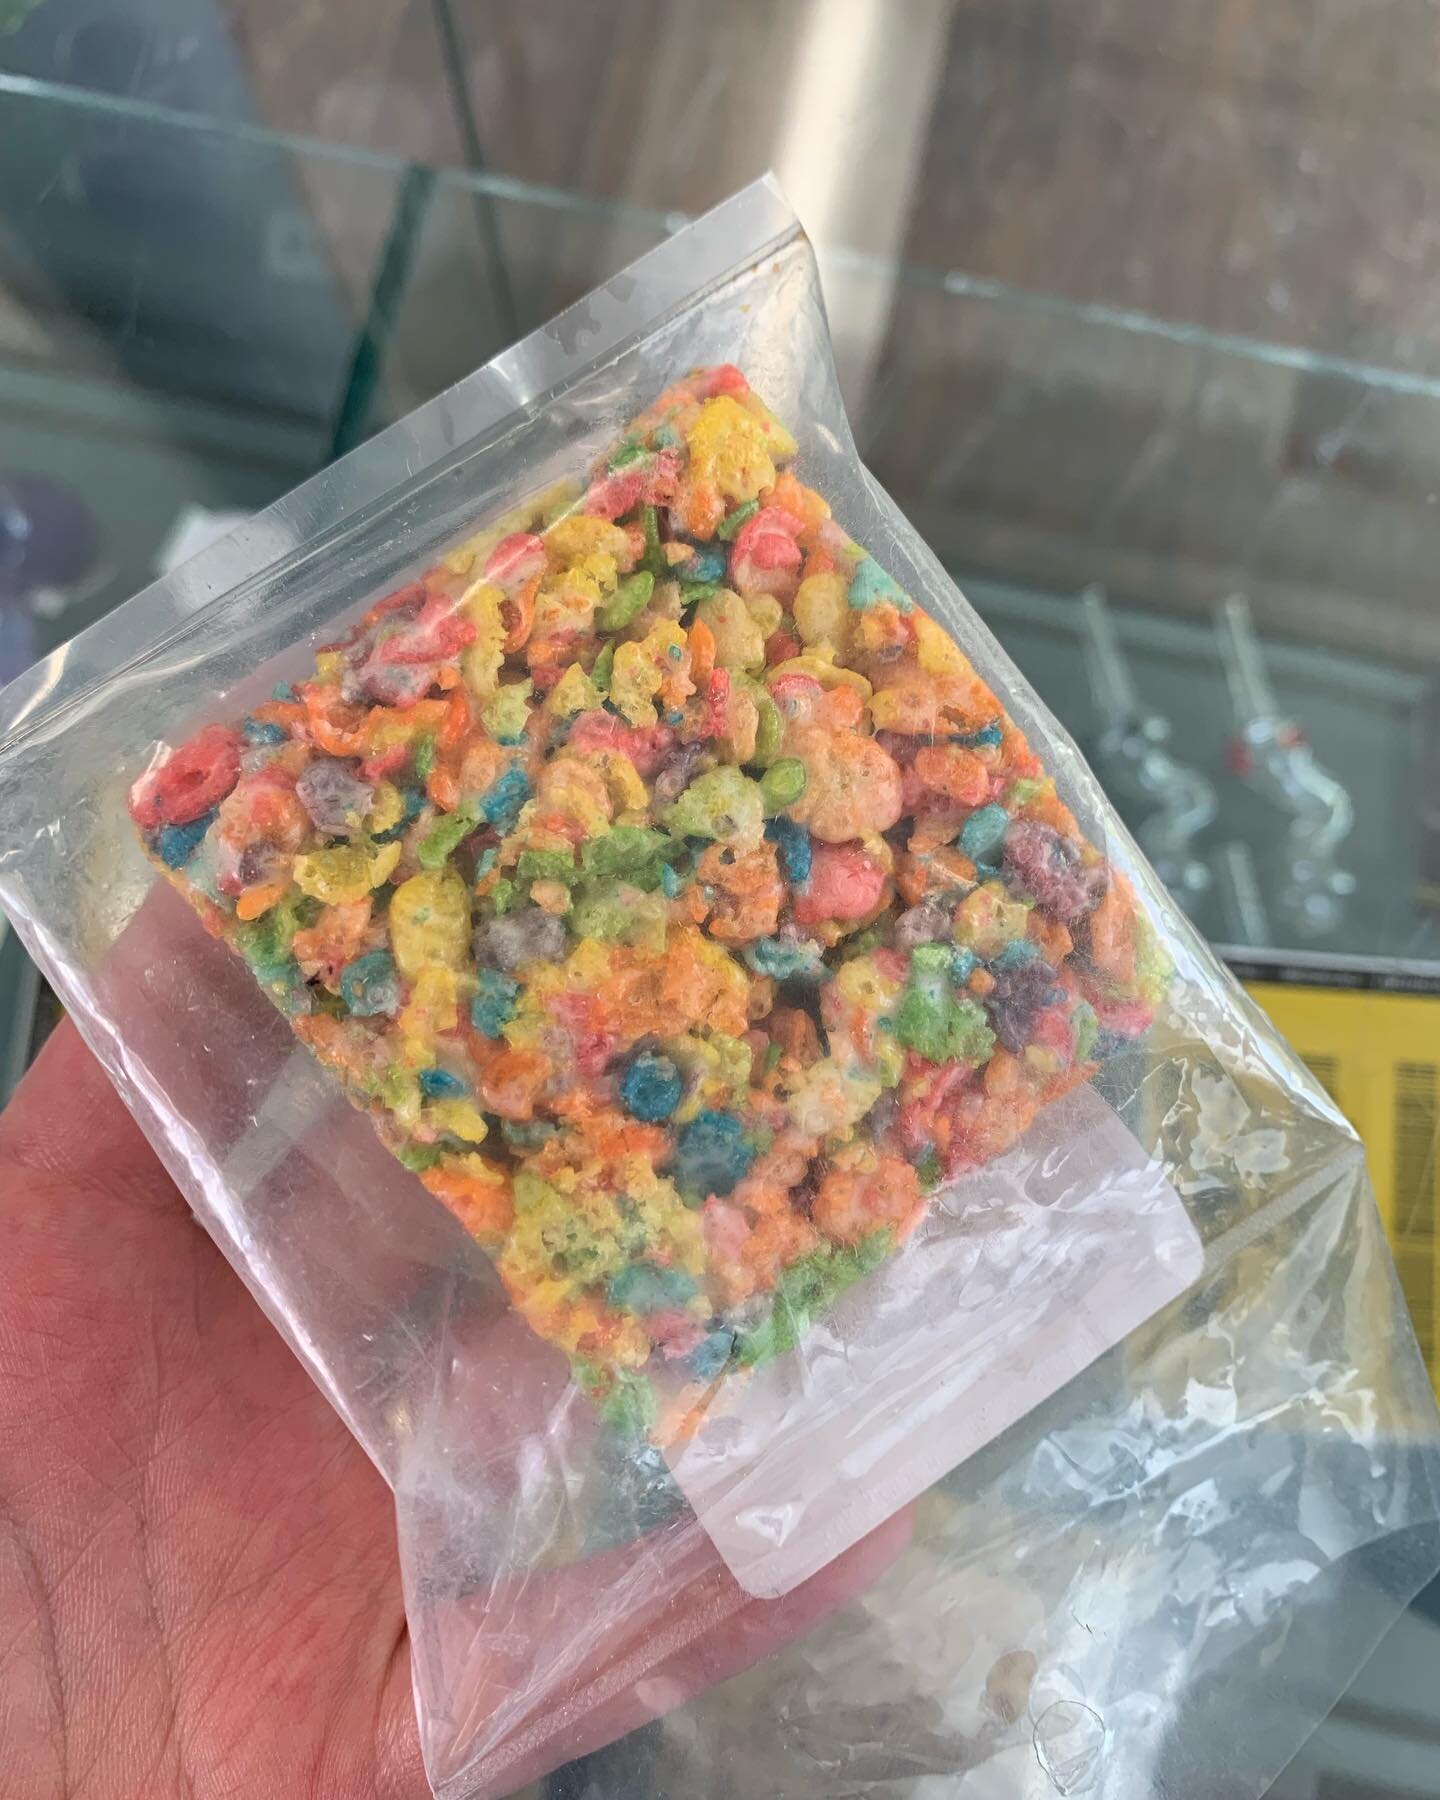 ‼️❕ N E W  G O O D I E S ❕‼️ Come in and check out our delicious fruity pebble rice treats. They are sure to curve any munchies you have and give you that awesome wind down you&rsquo;re looking for. Not feeling something sweet? Try one of our tinctur